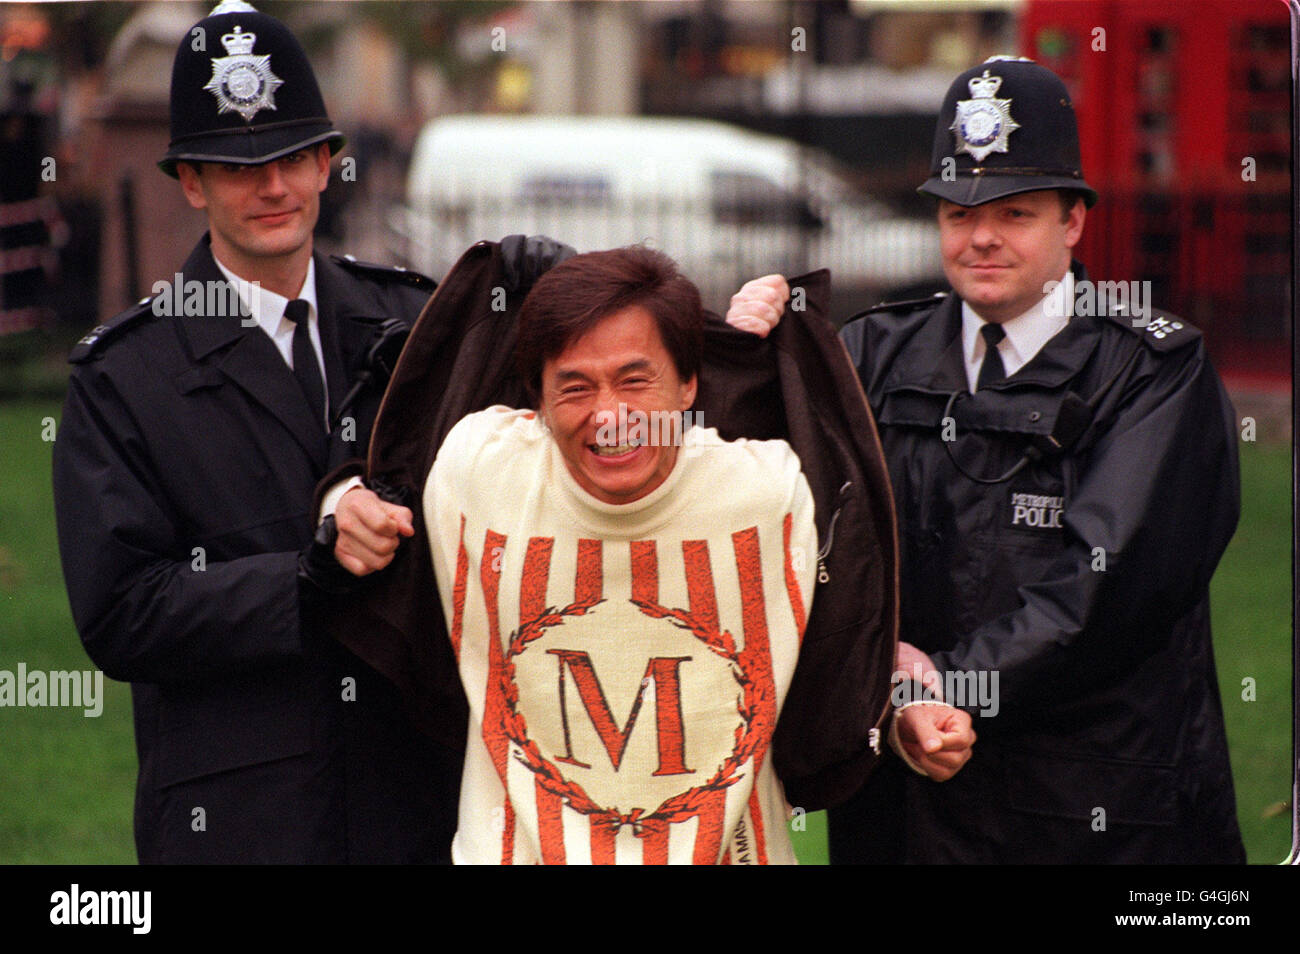 Actor Jackie Chan with Metropolitan police officers during a photocall in  London's Leicester Square to promote his latest movie Rush Hour. * 10/11/99  Hollywood action hero Jackie Chan who has admitted that